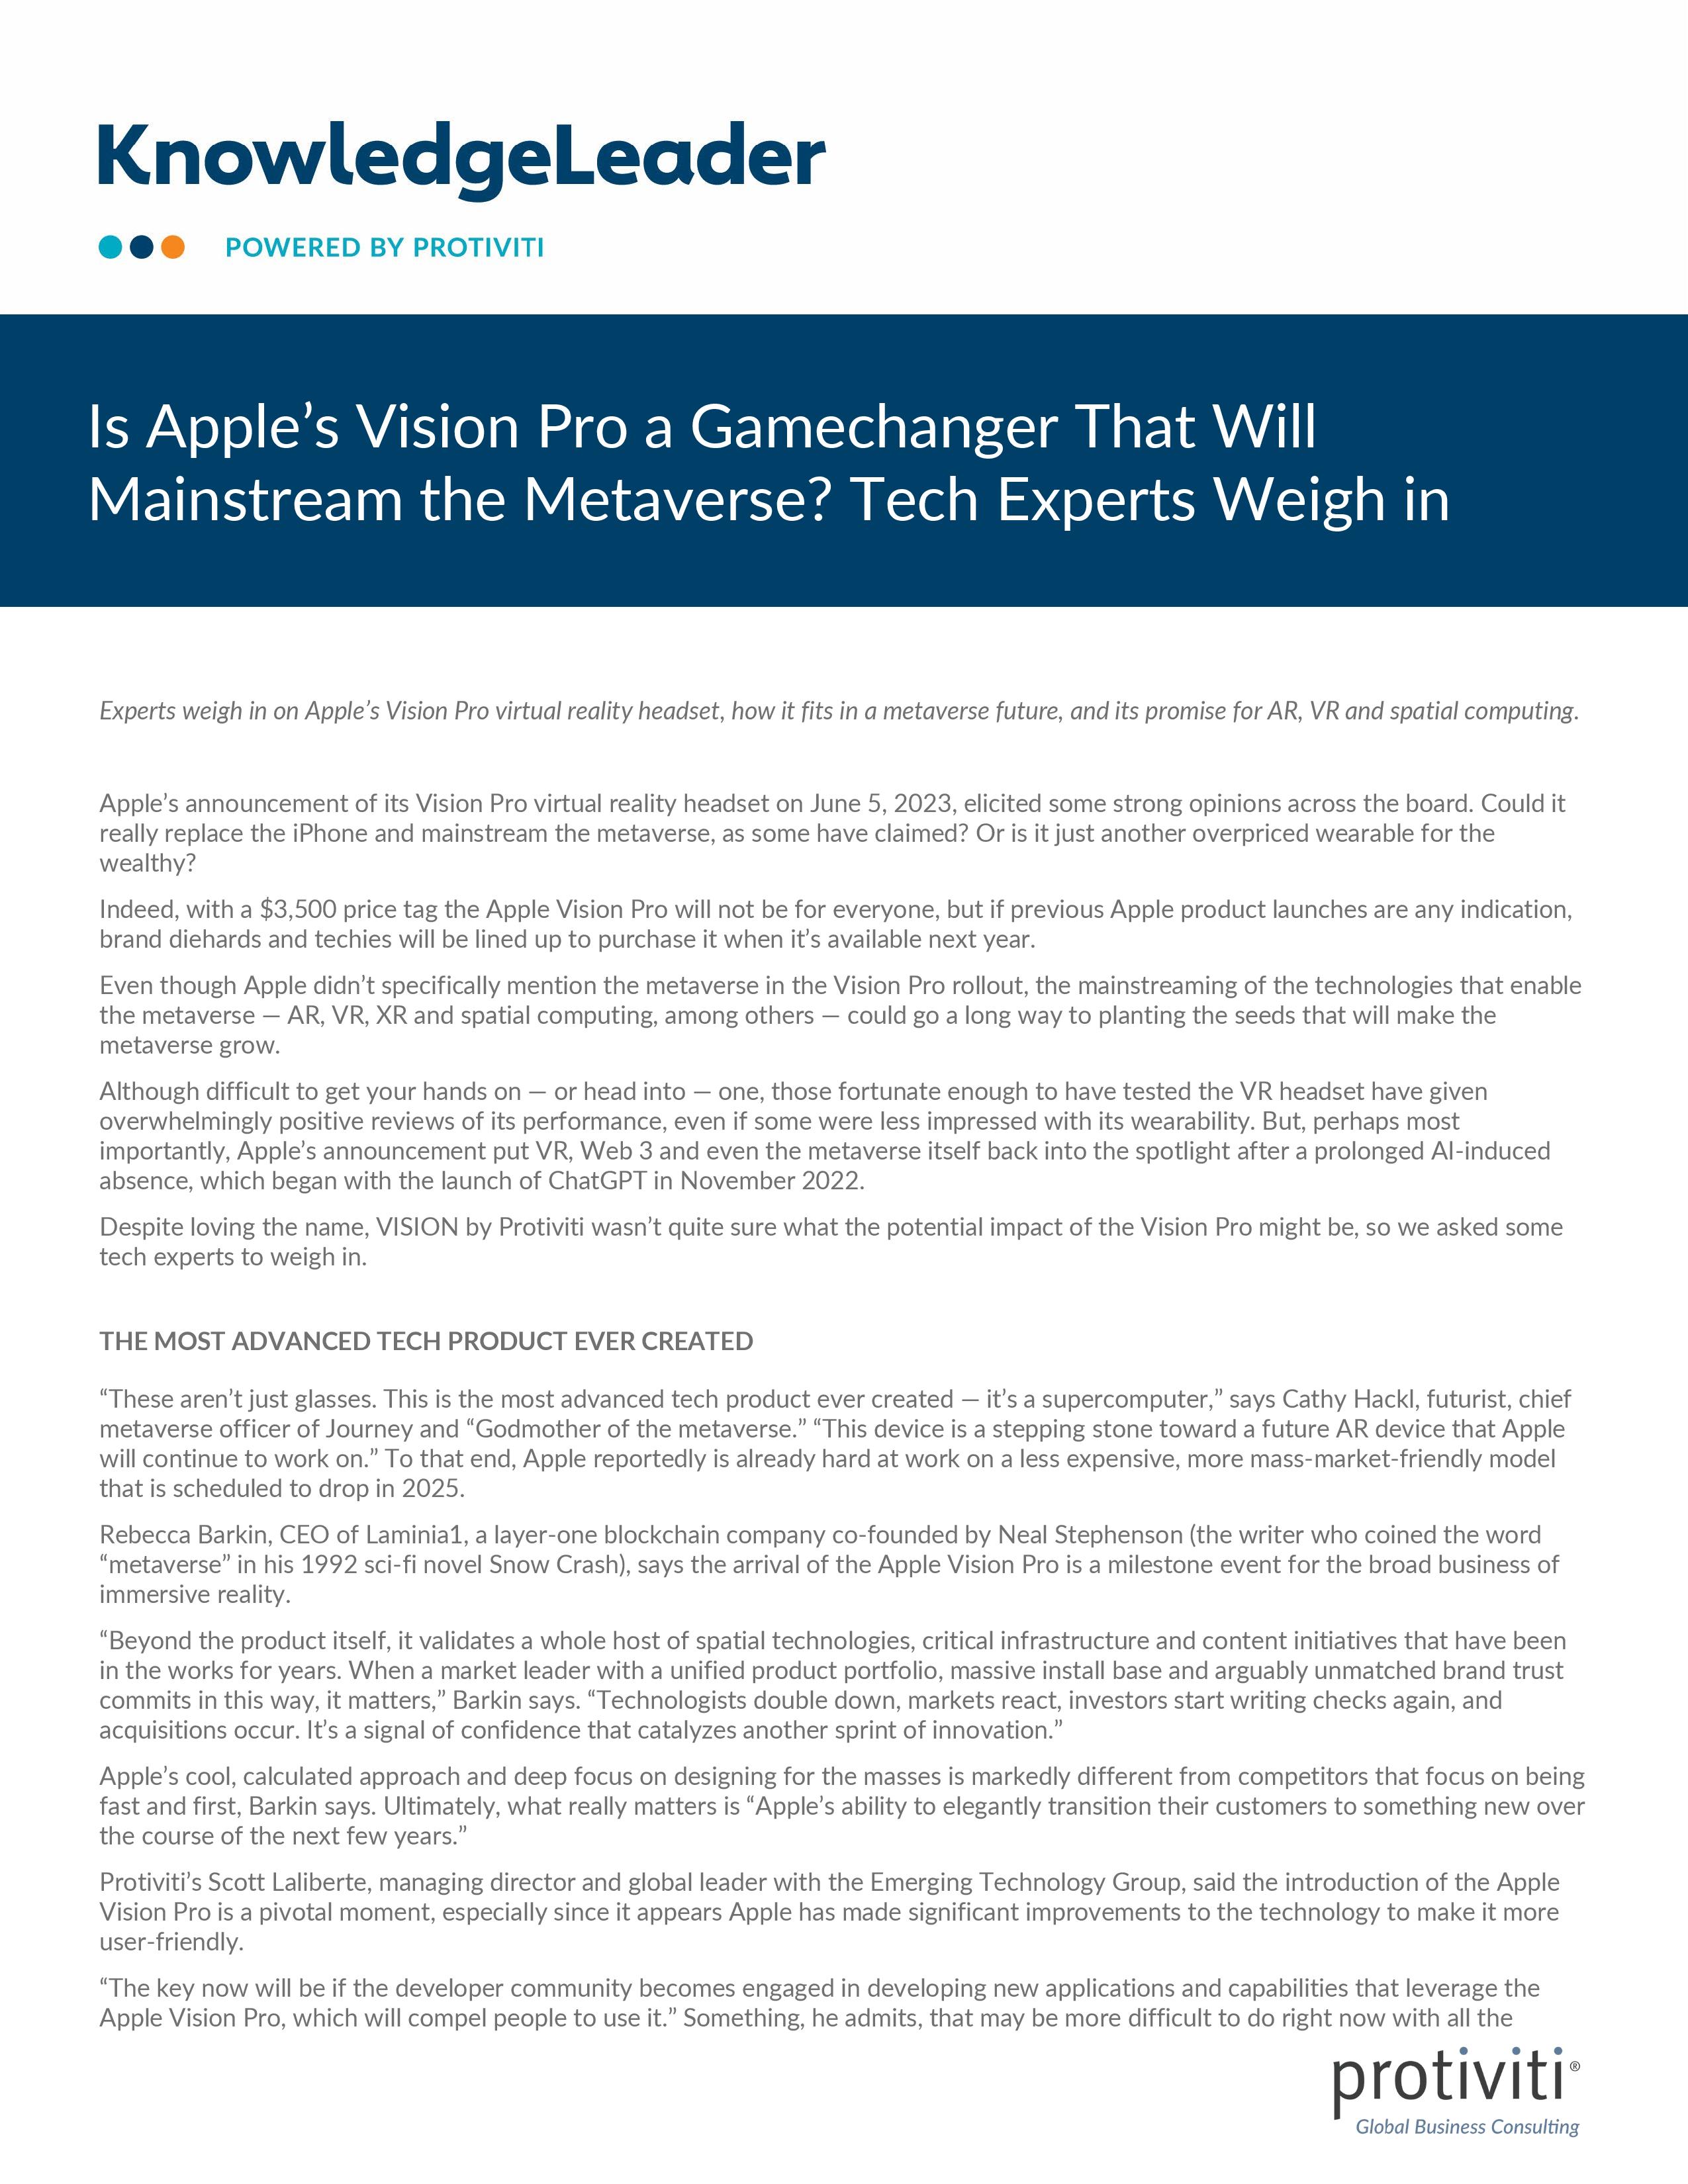 Screenshot of the first page of Is Apple’s Vision Pro a Gamechanger That Will Mainstream the Metaverse Tech Experts Weigh in